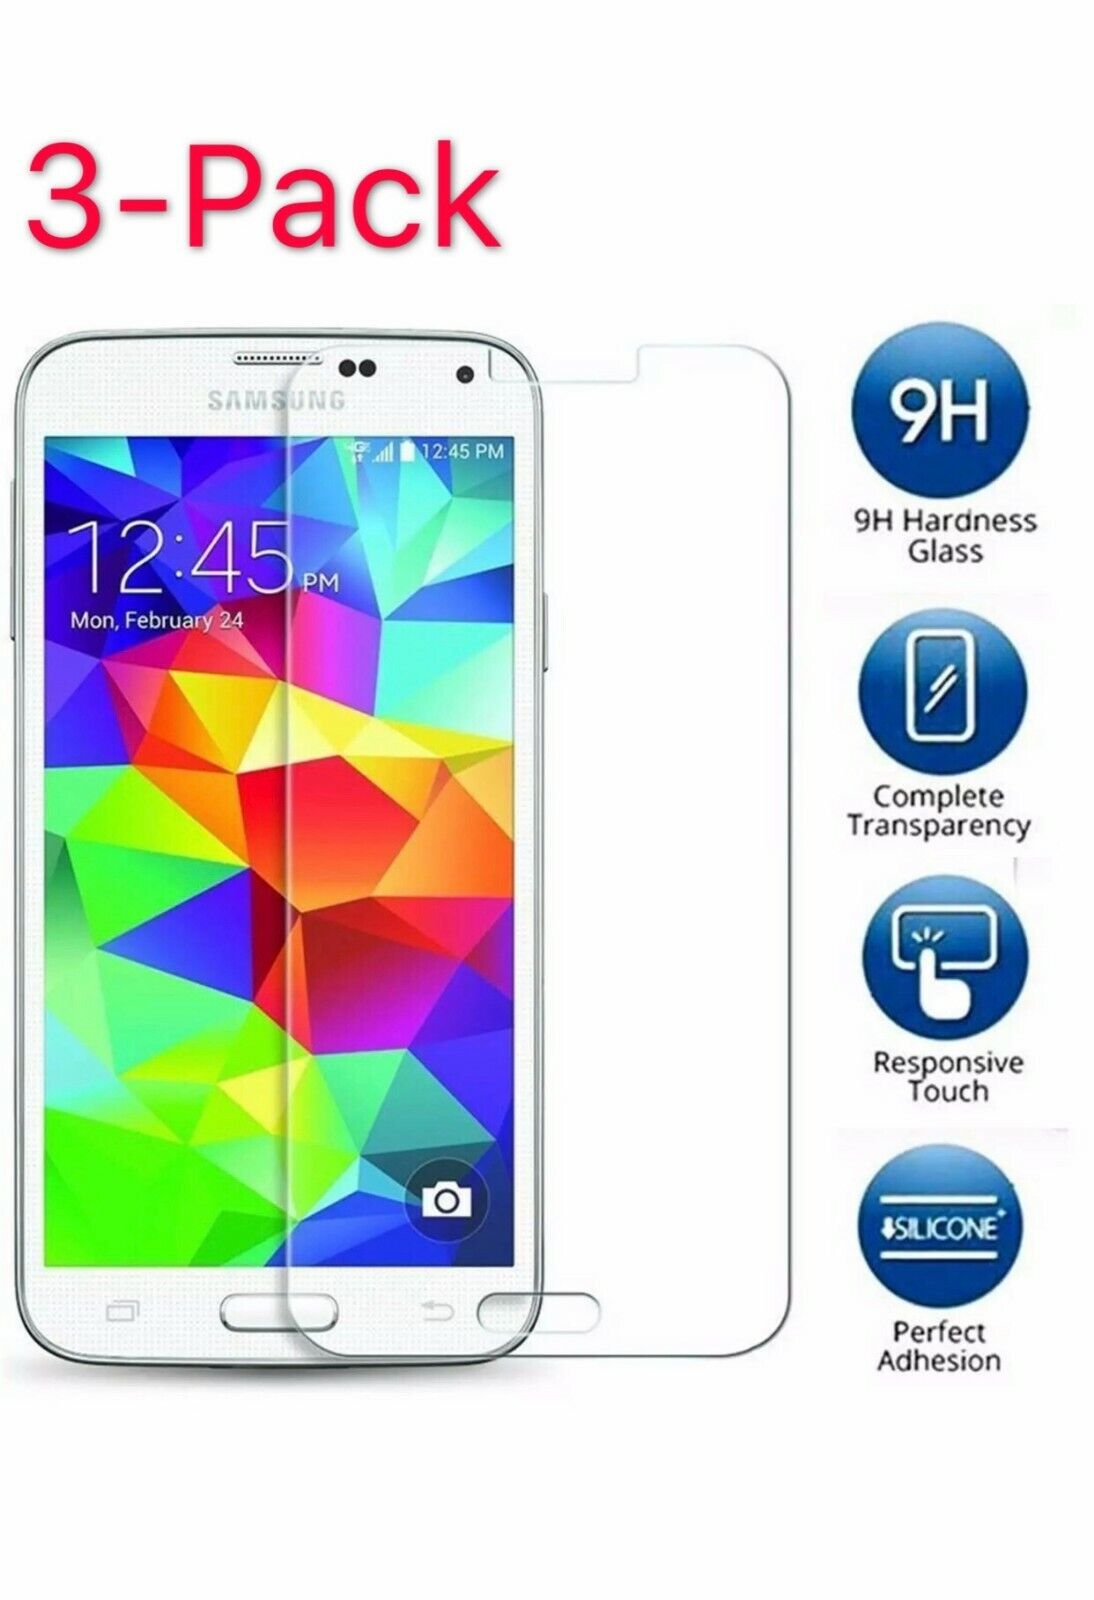 3 Pack Premium Tempered Glass Screen Protector Film for Samsung Galaxy S5 SAMSUNG GALAXY GALAXY